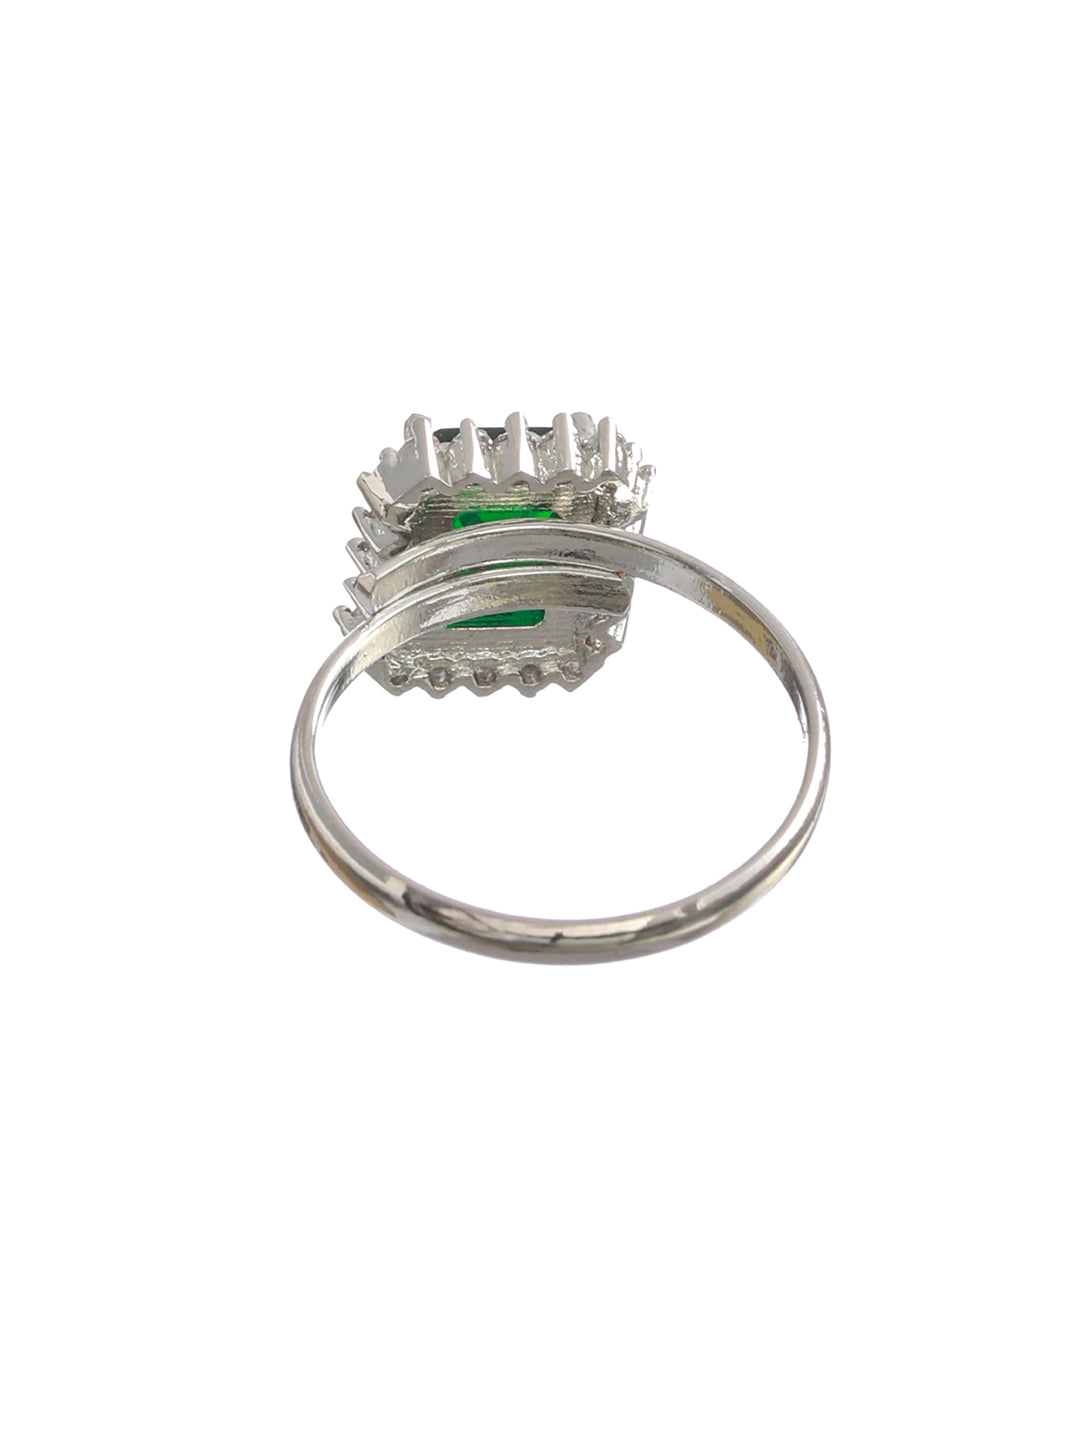 Priyaasi Emerald Green Silver Plated Solitaire Ring